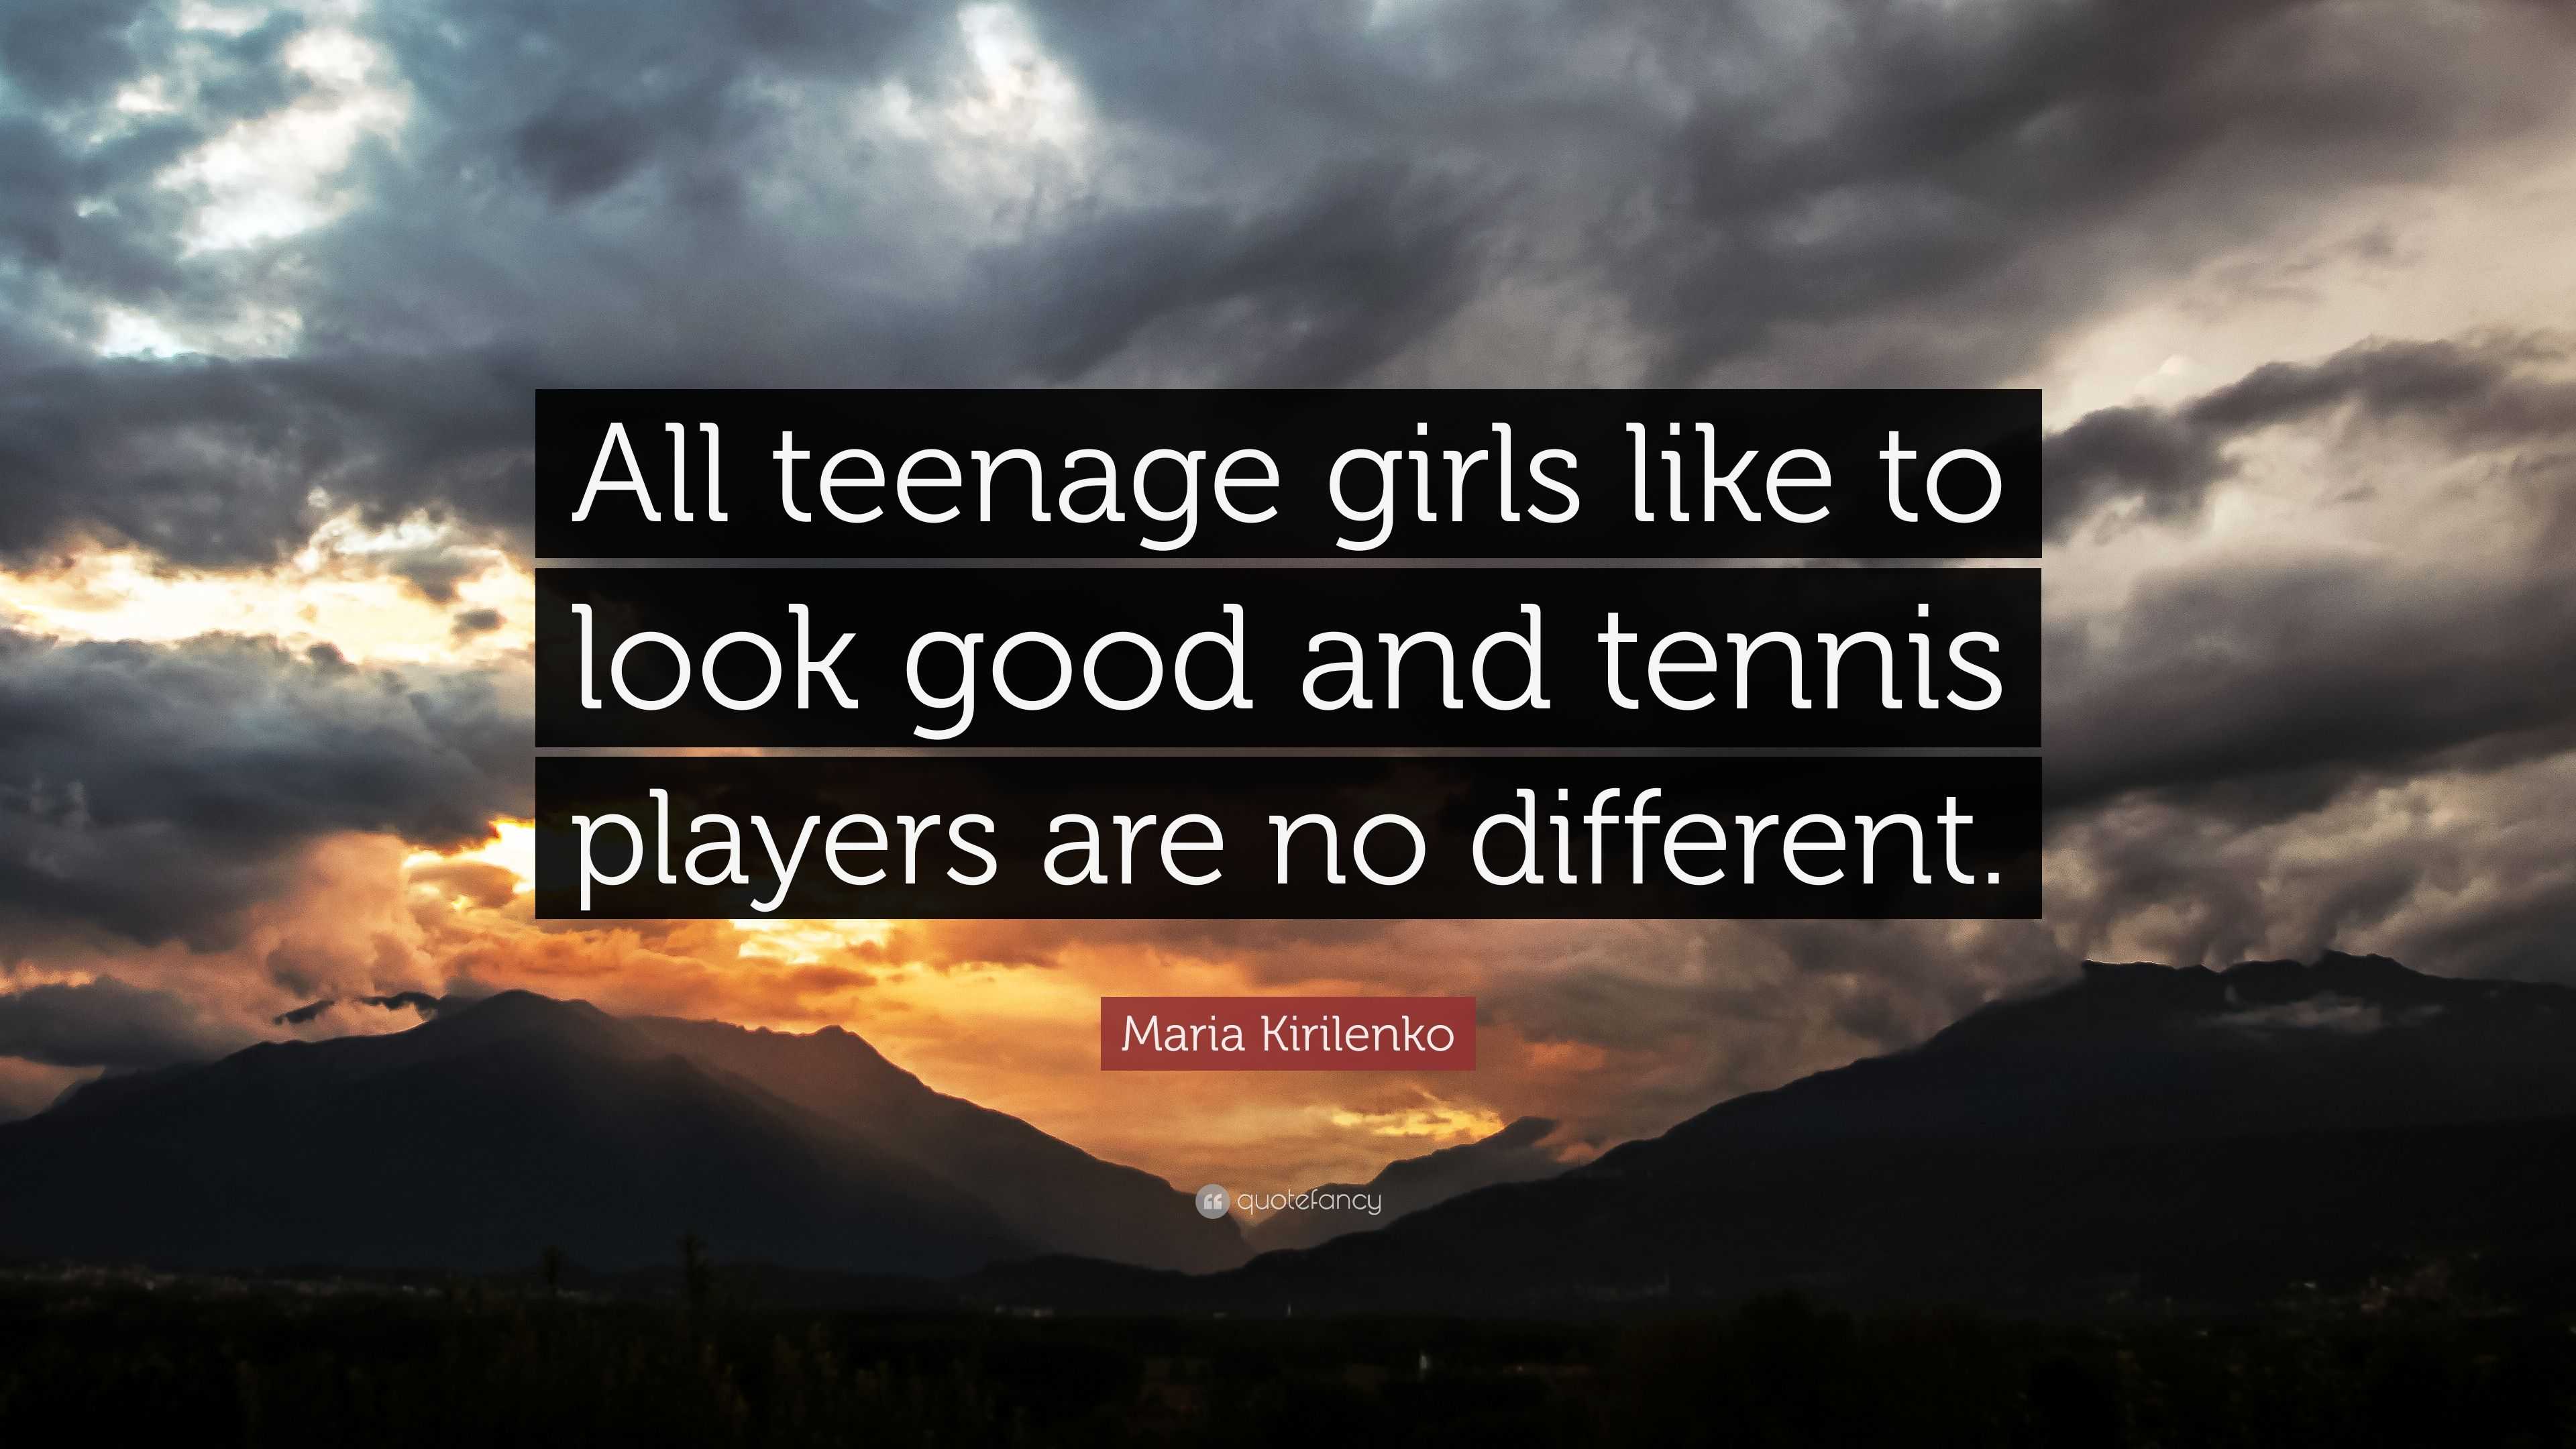 life quotes to live by for teenage girls